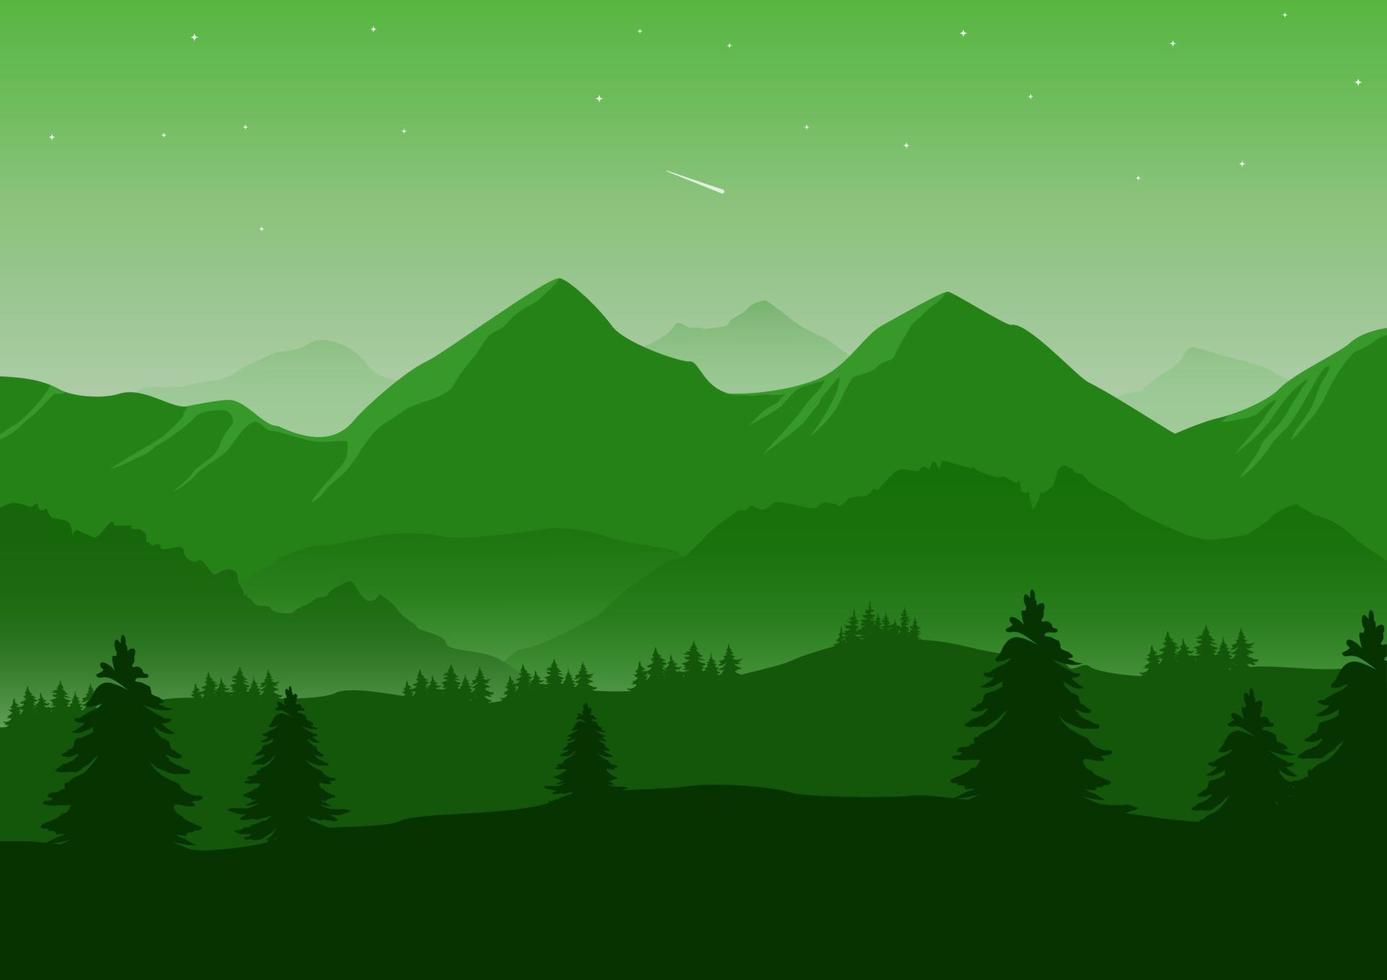 Realistic mountains landscape vector illustration. Pine trees and mountains' green silhouettes for the background.